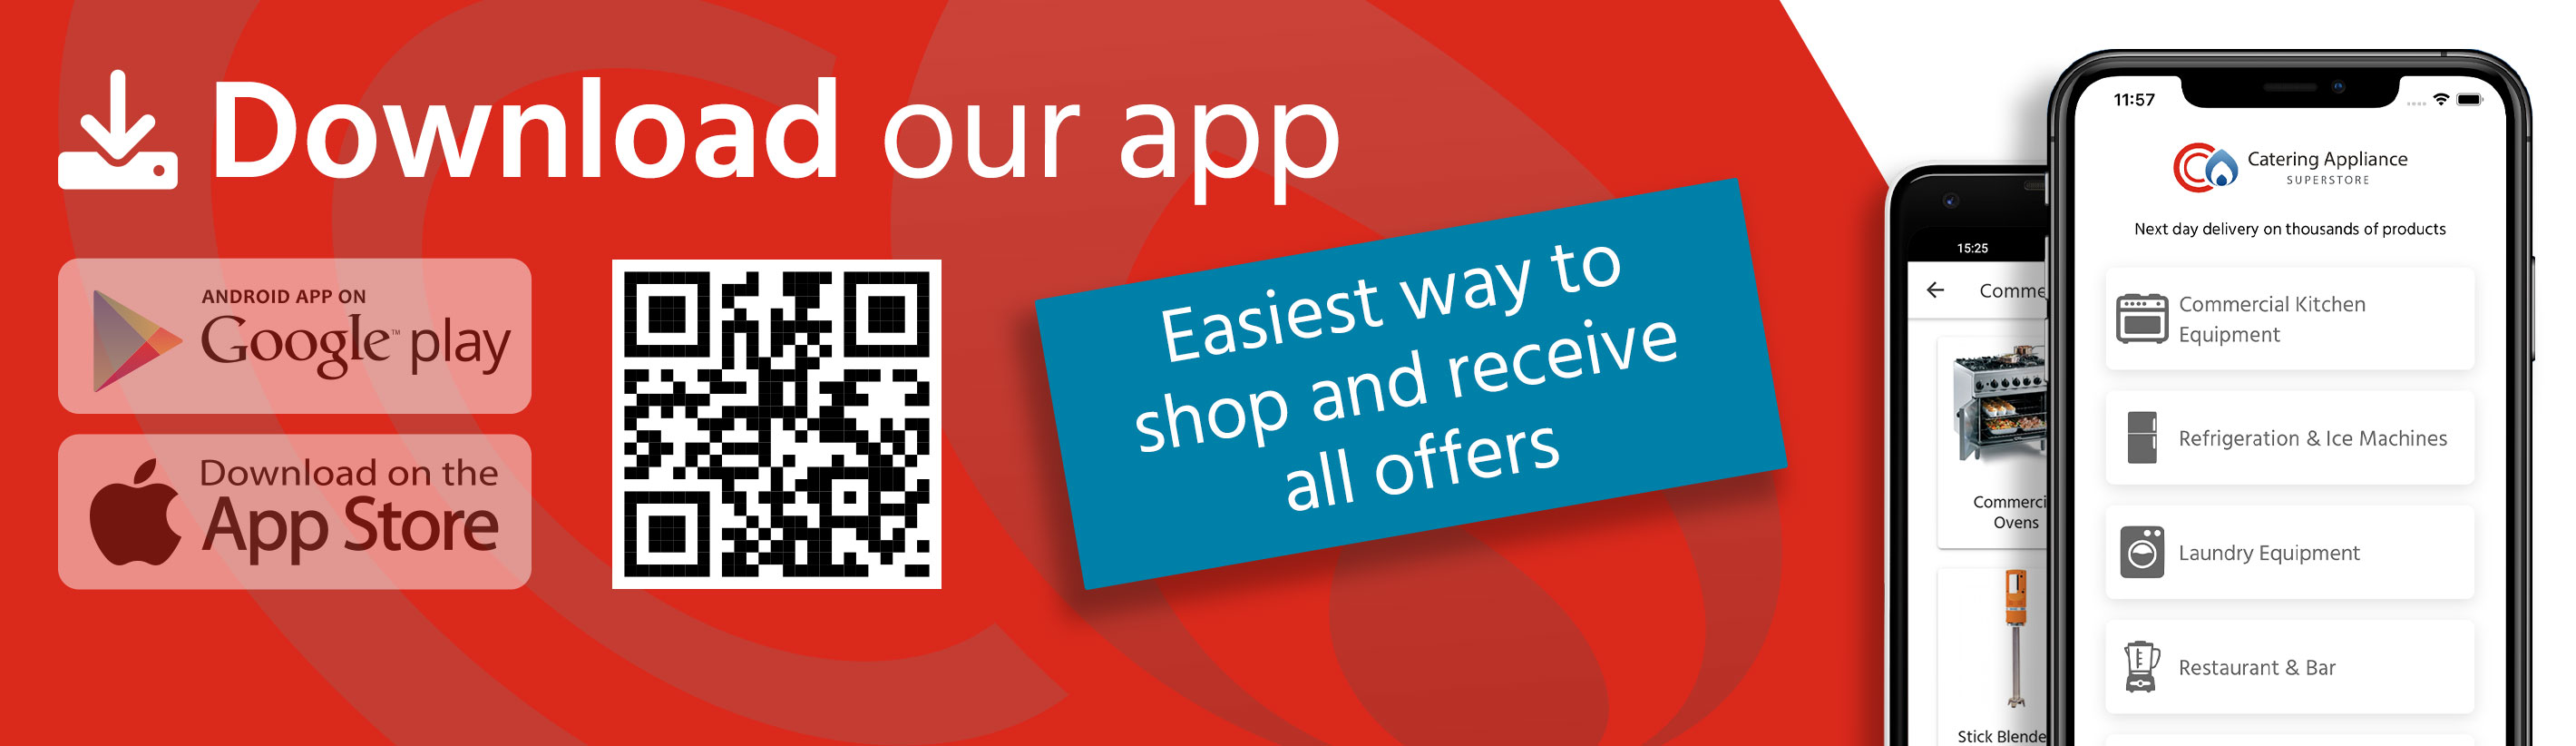 Download the app for iOS or Android, The easiest way to shop and receive all offers